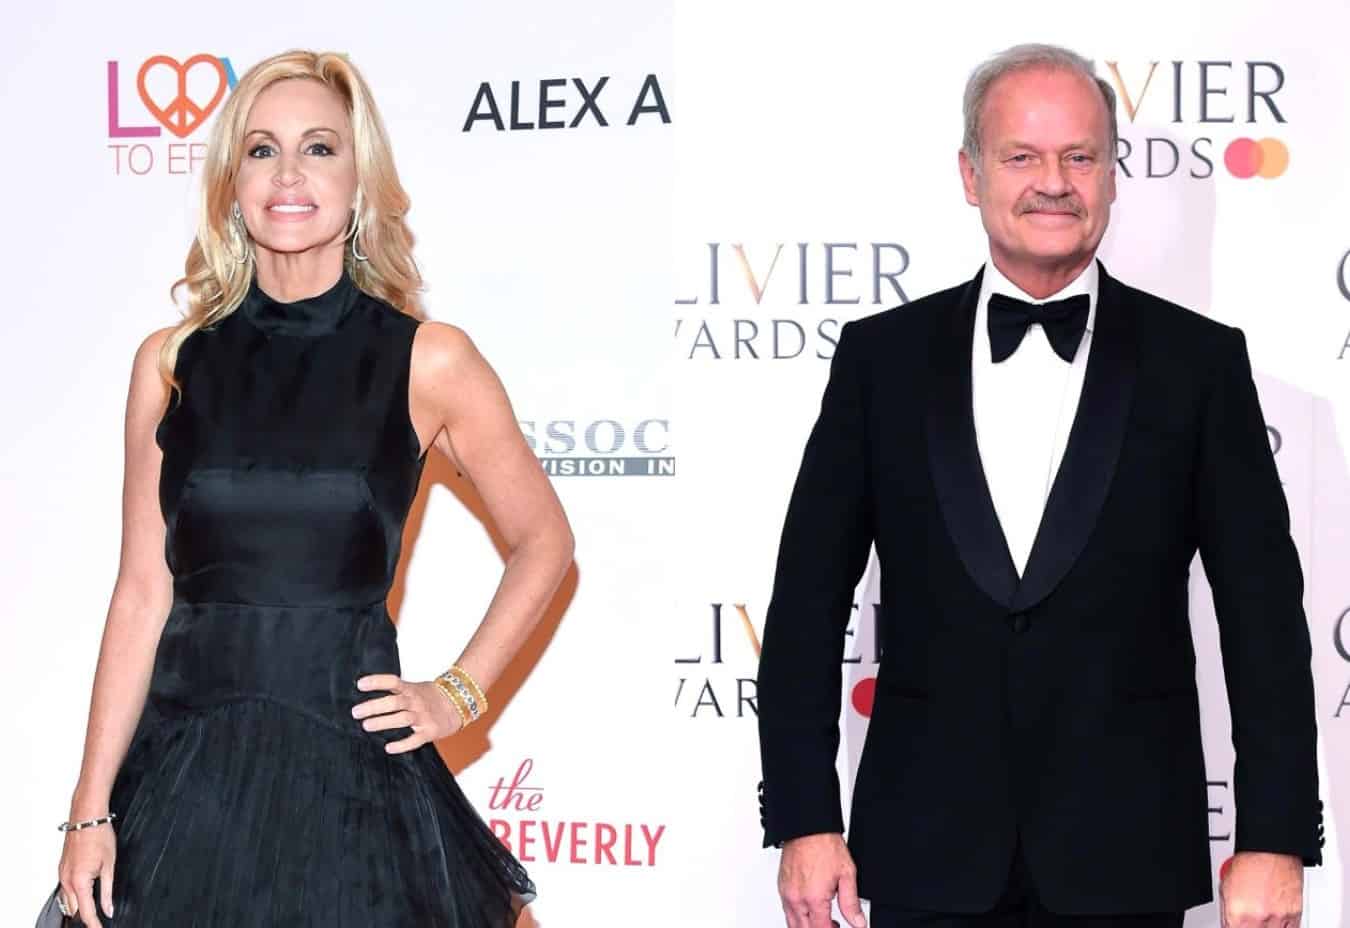 RHOBH's Camille Grammer Blasted By Ex-Husband Kelsey Grammer for "Pathetic" Antics and Accused of Blowing Up on Him on Day of His Mother's Funeral